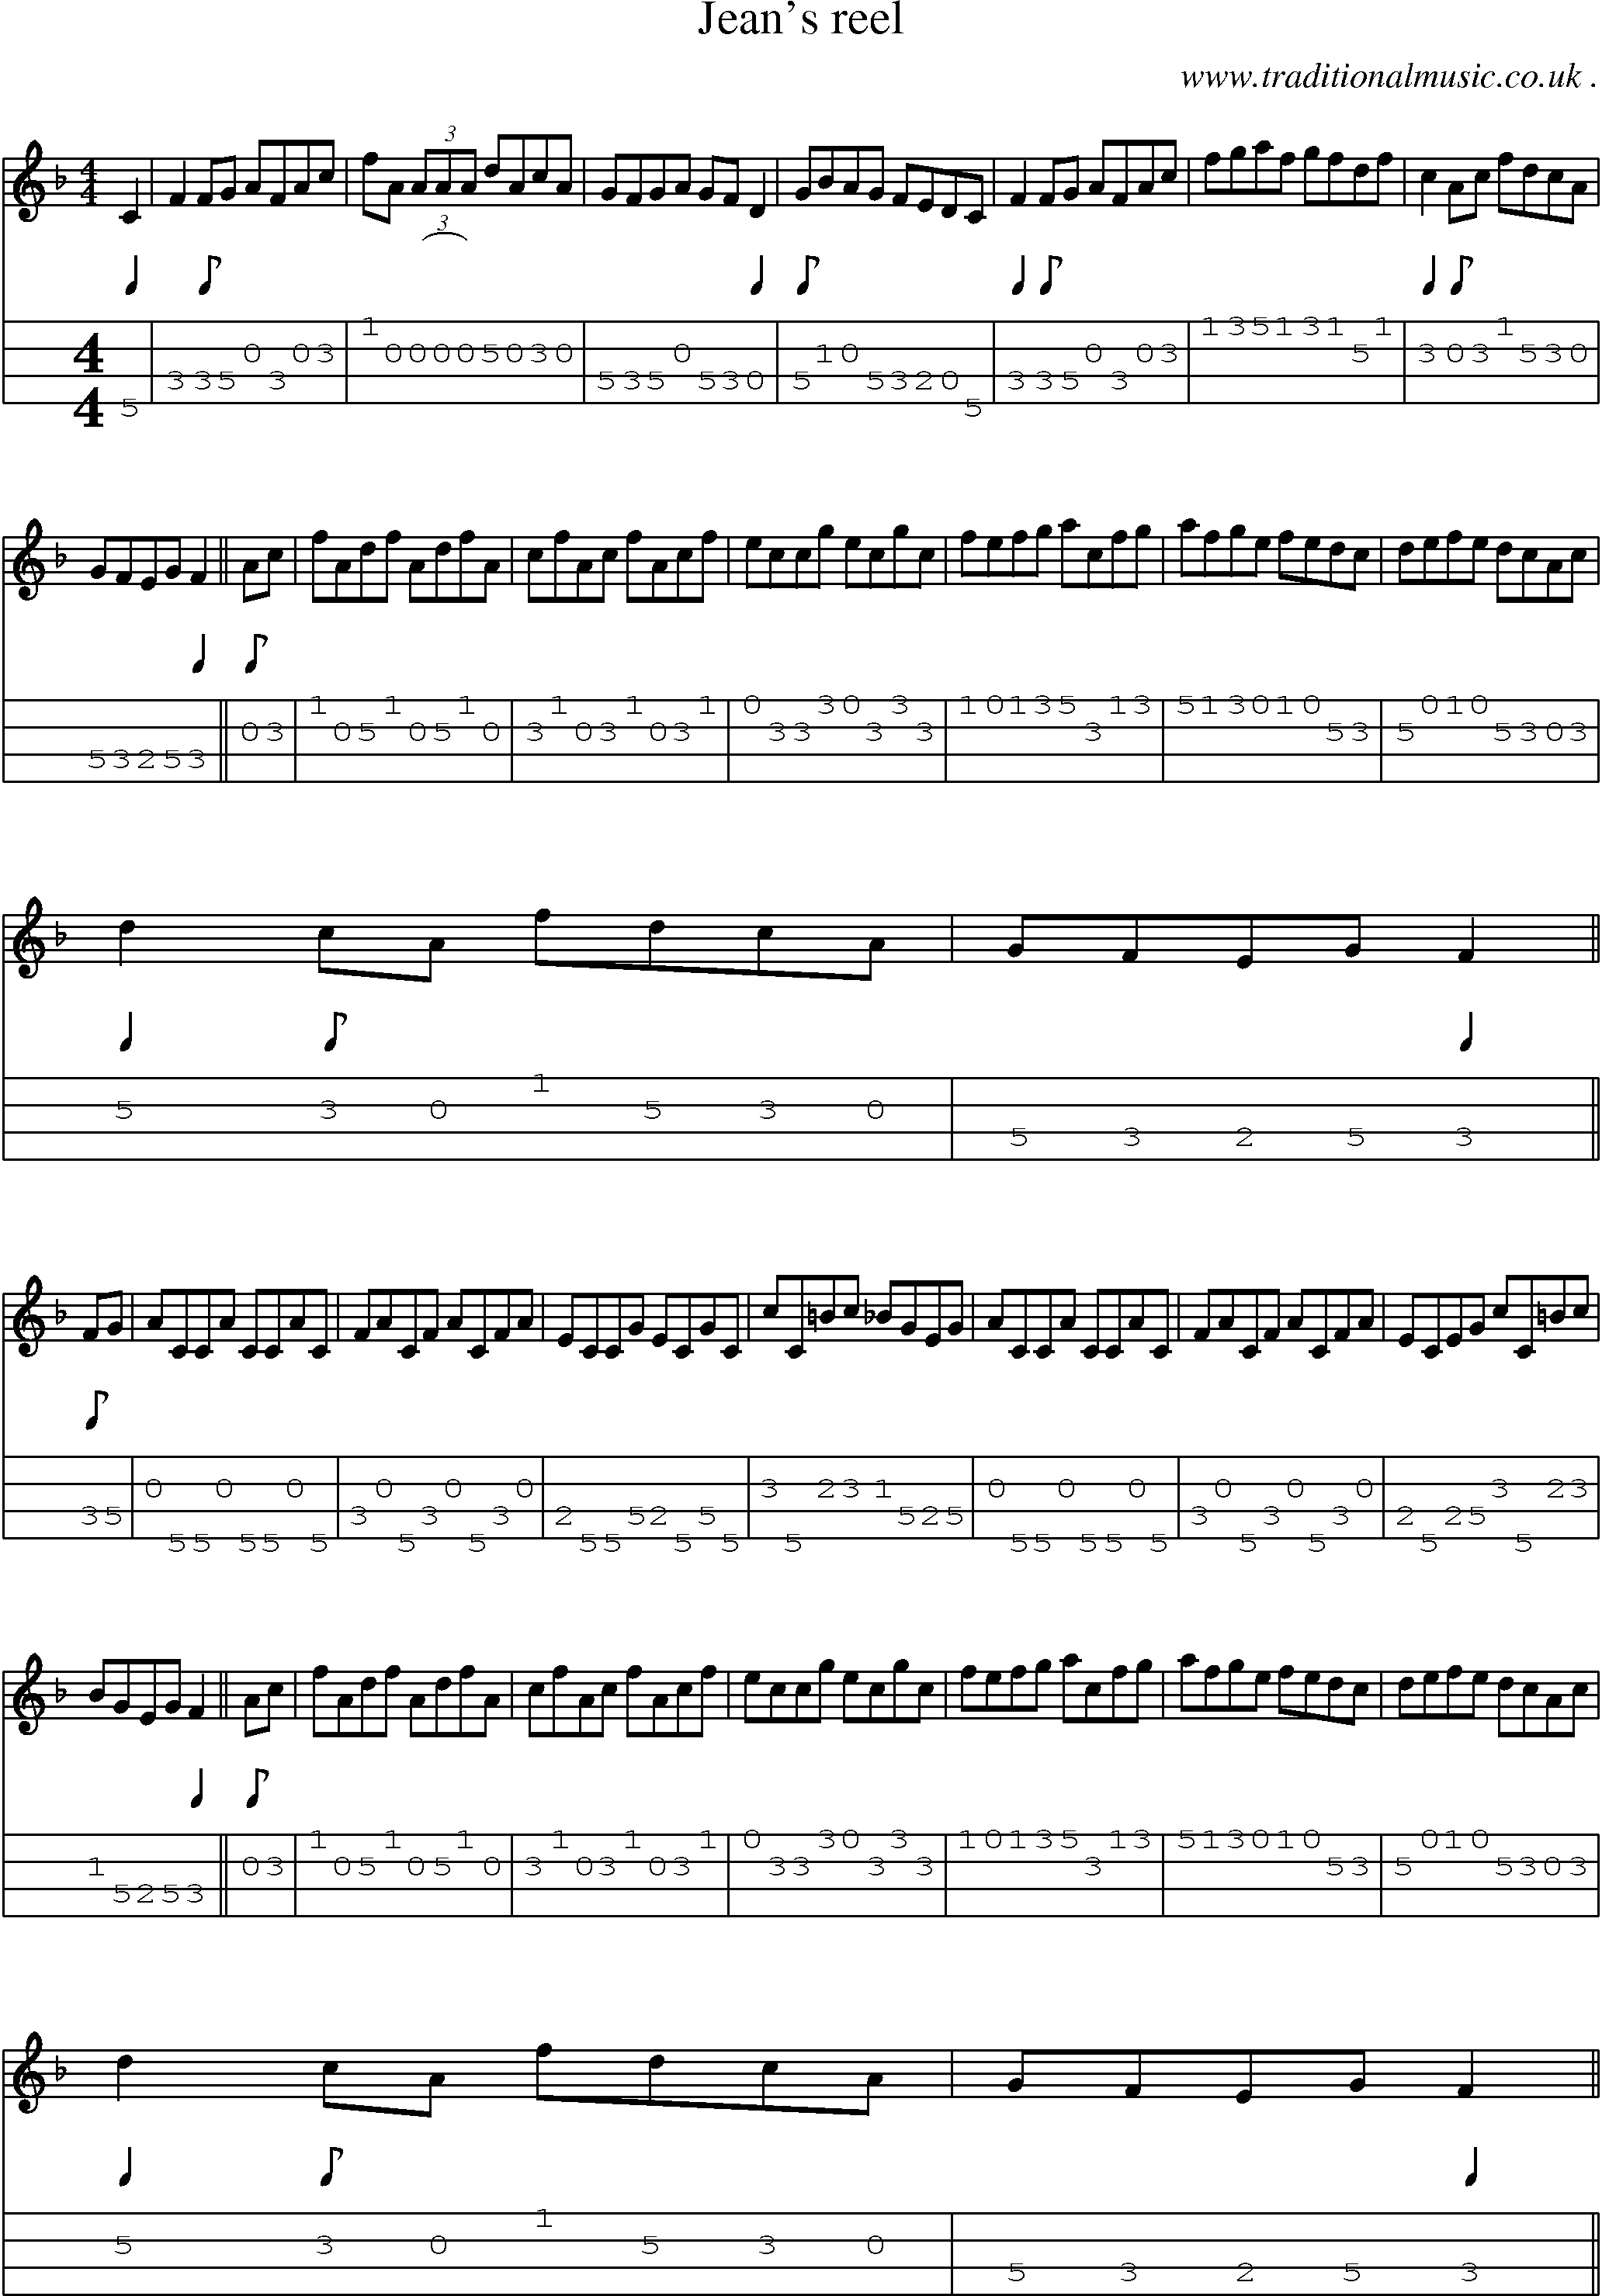 Sheet-music  score, Chords and Mandolin Tabs for Jeans Reel